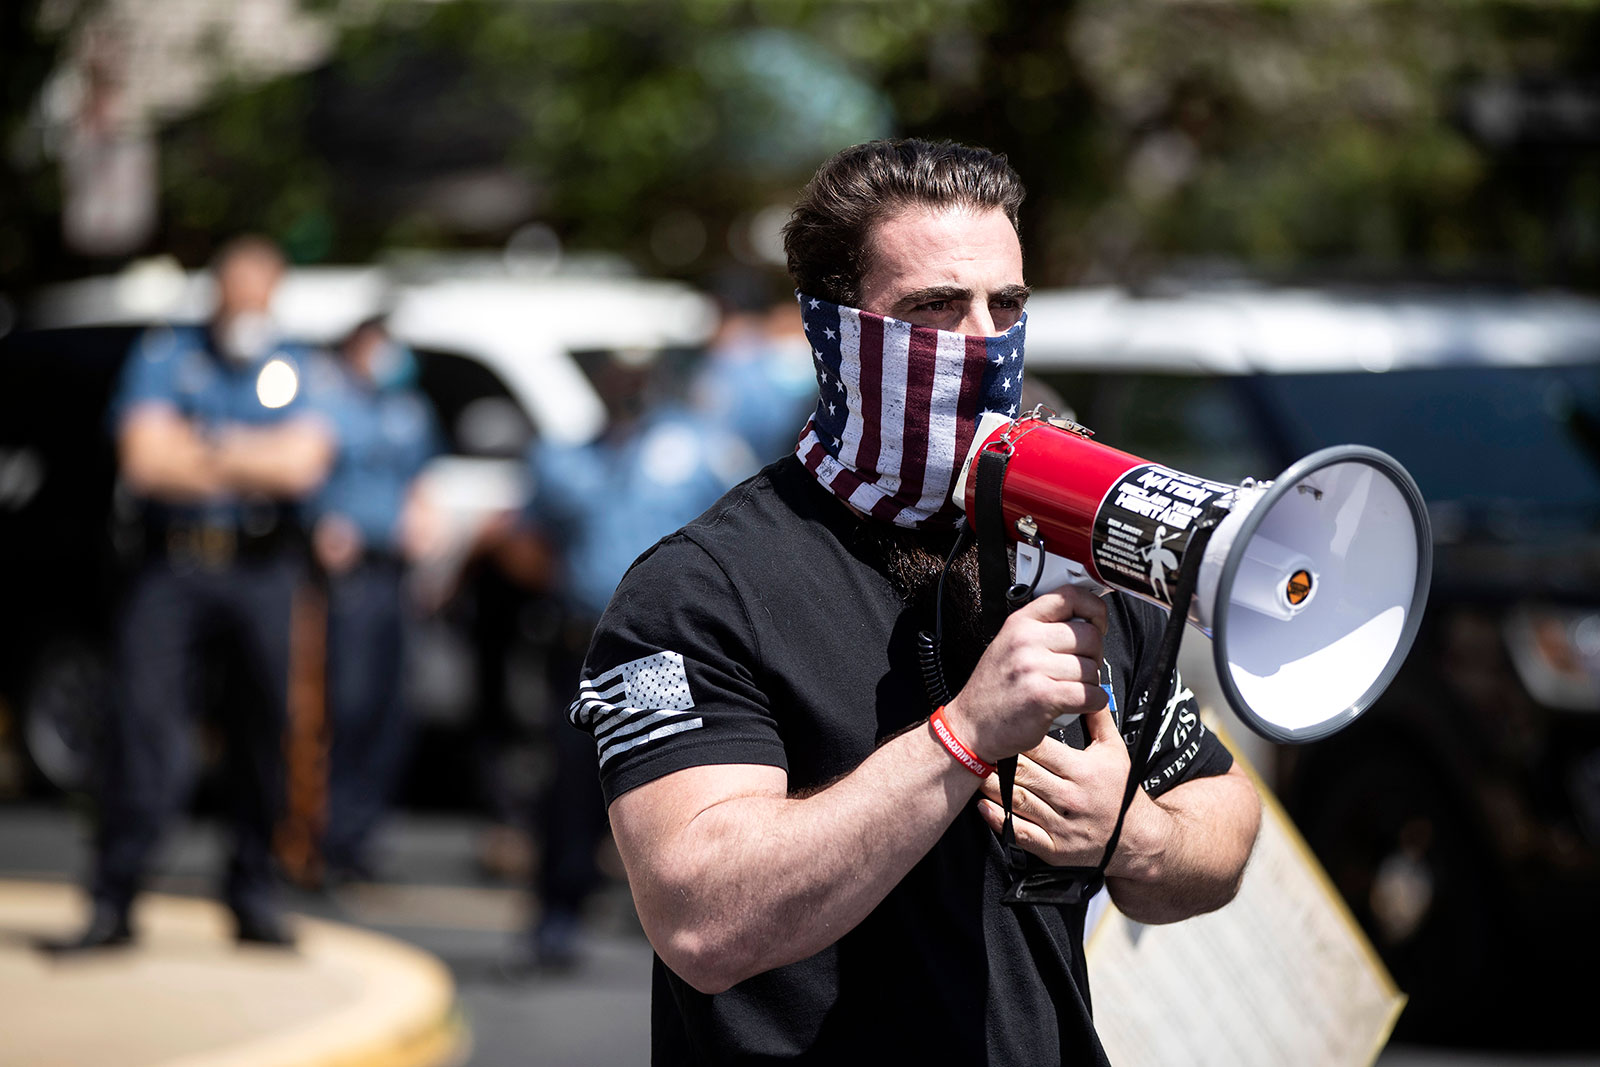 Ian Smith, co-owner of Atilis Gym, speaks into a megaphone outside of his gym in Bellmawr, New Jersey, on May 18.